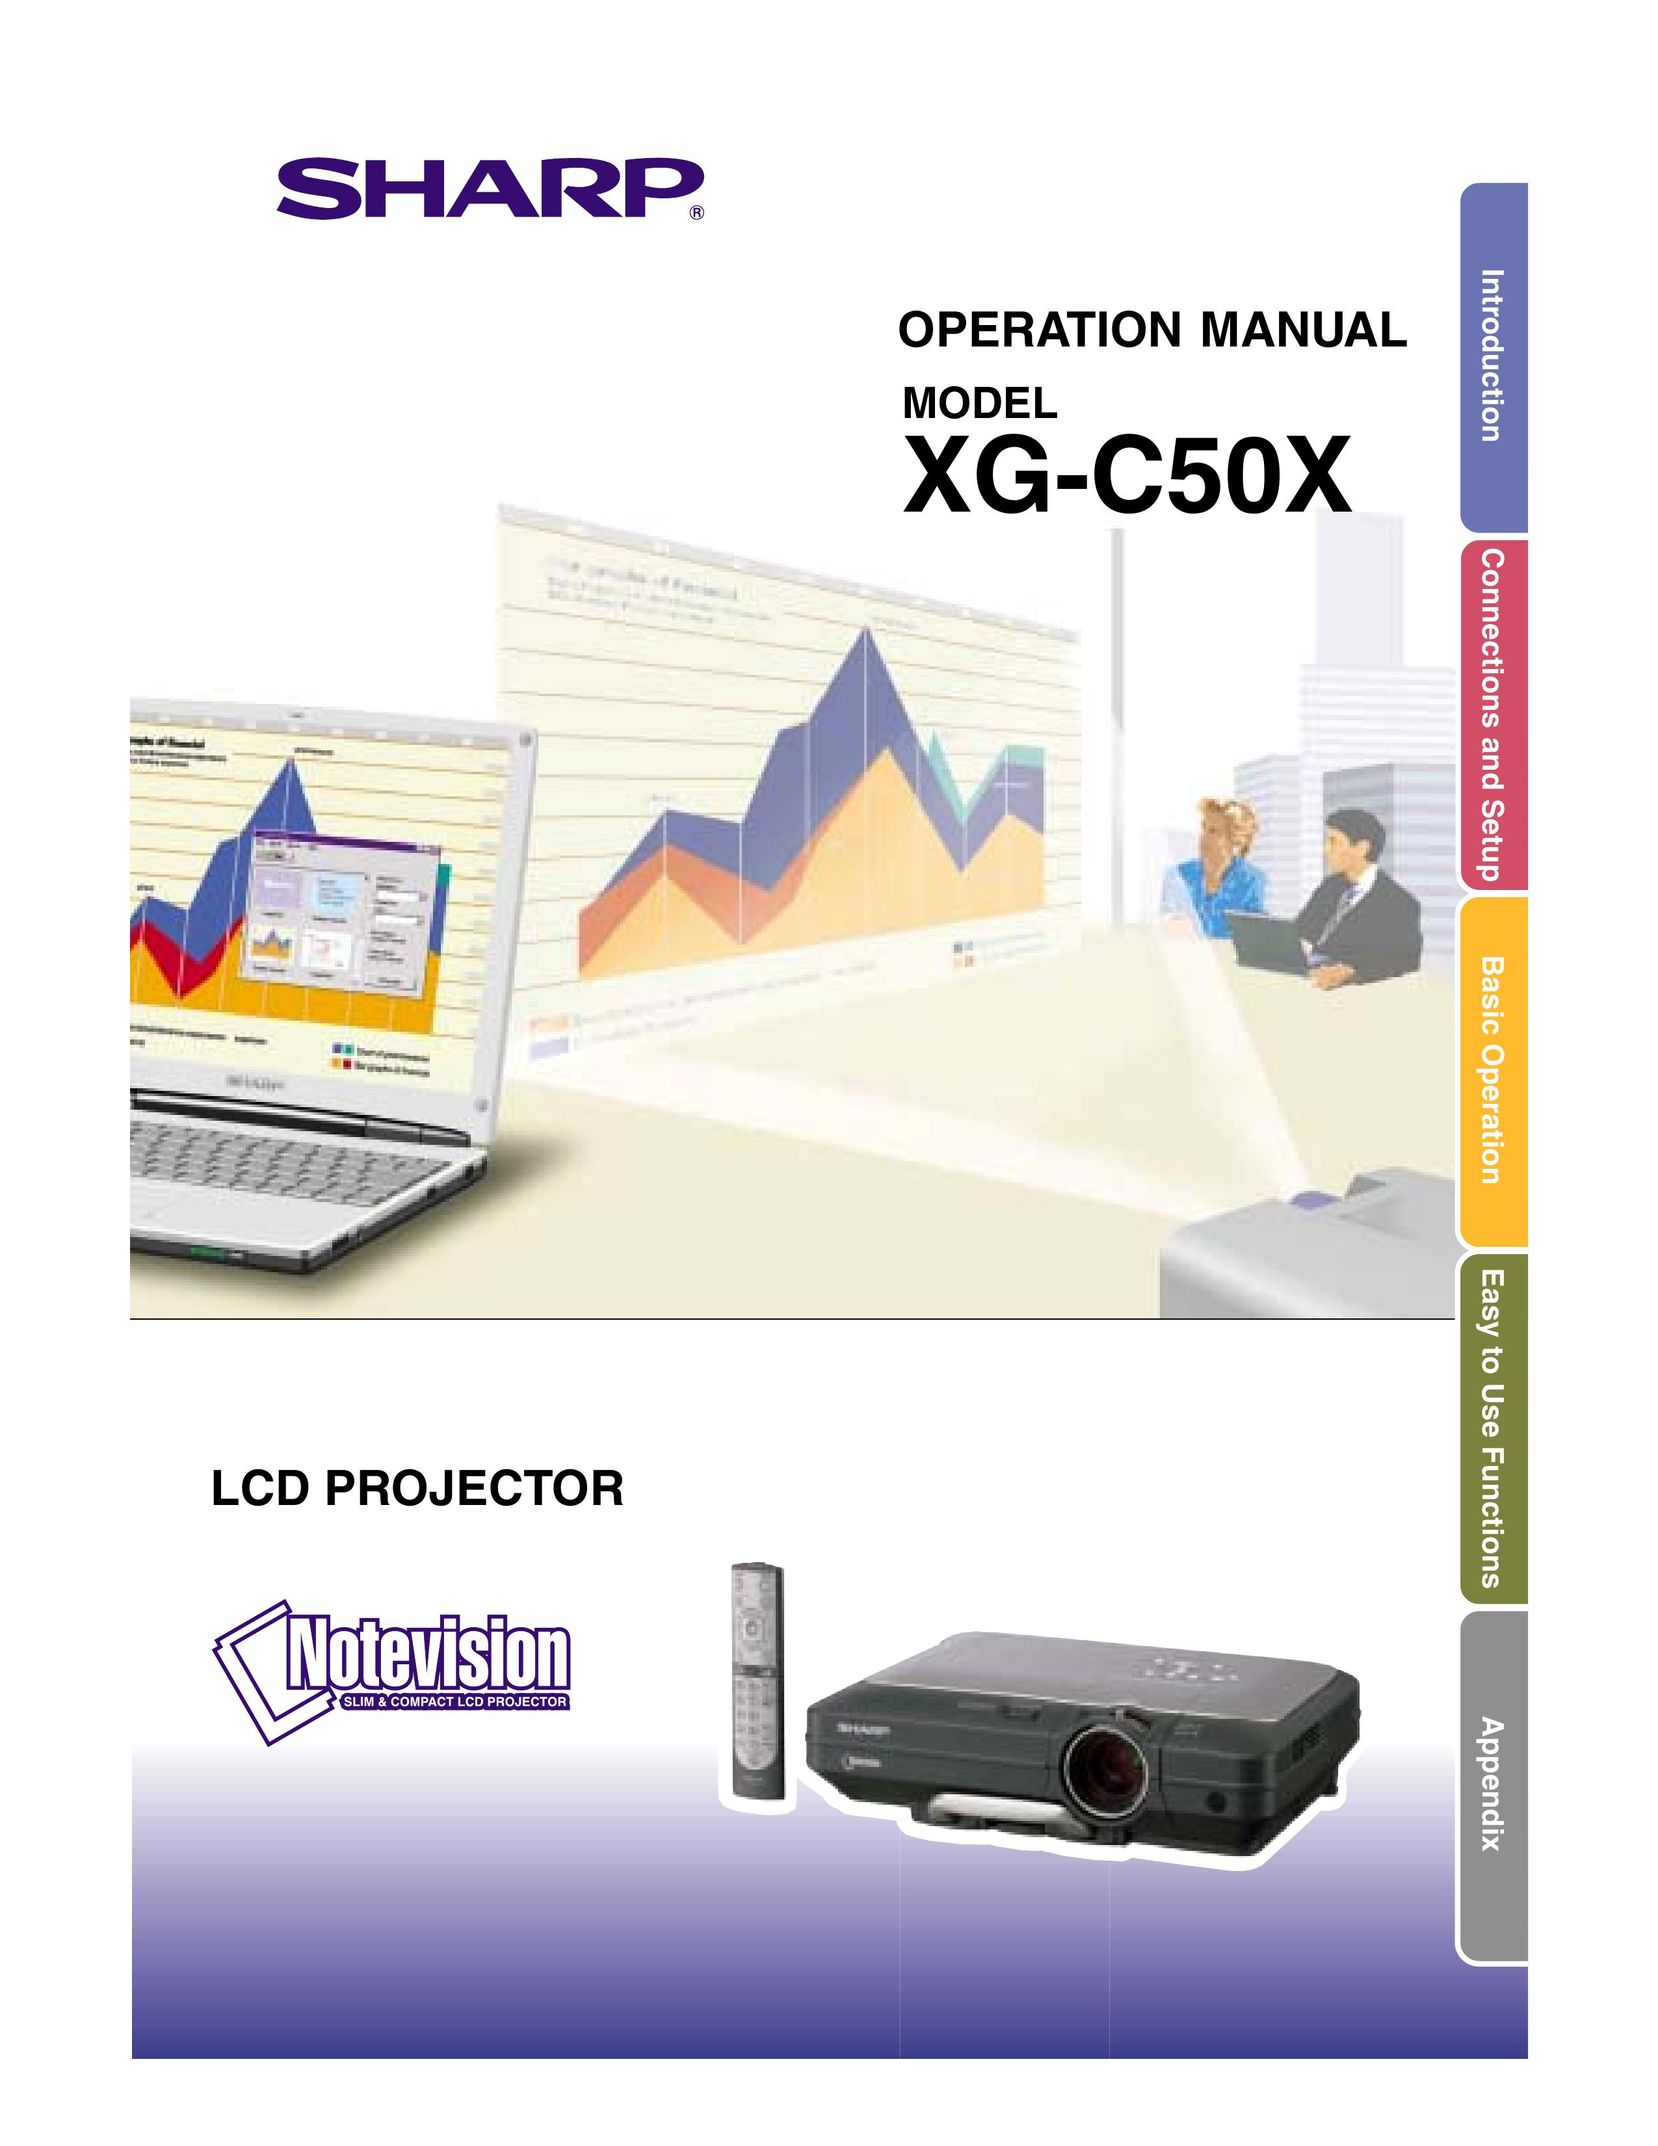 Sharp XG-C50X Projection Television User Manual